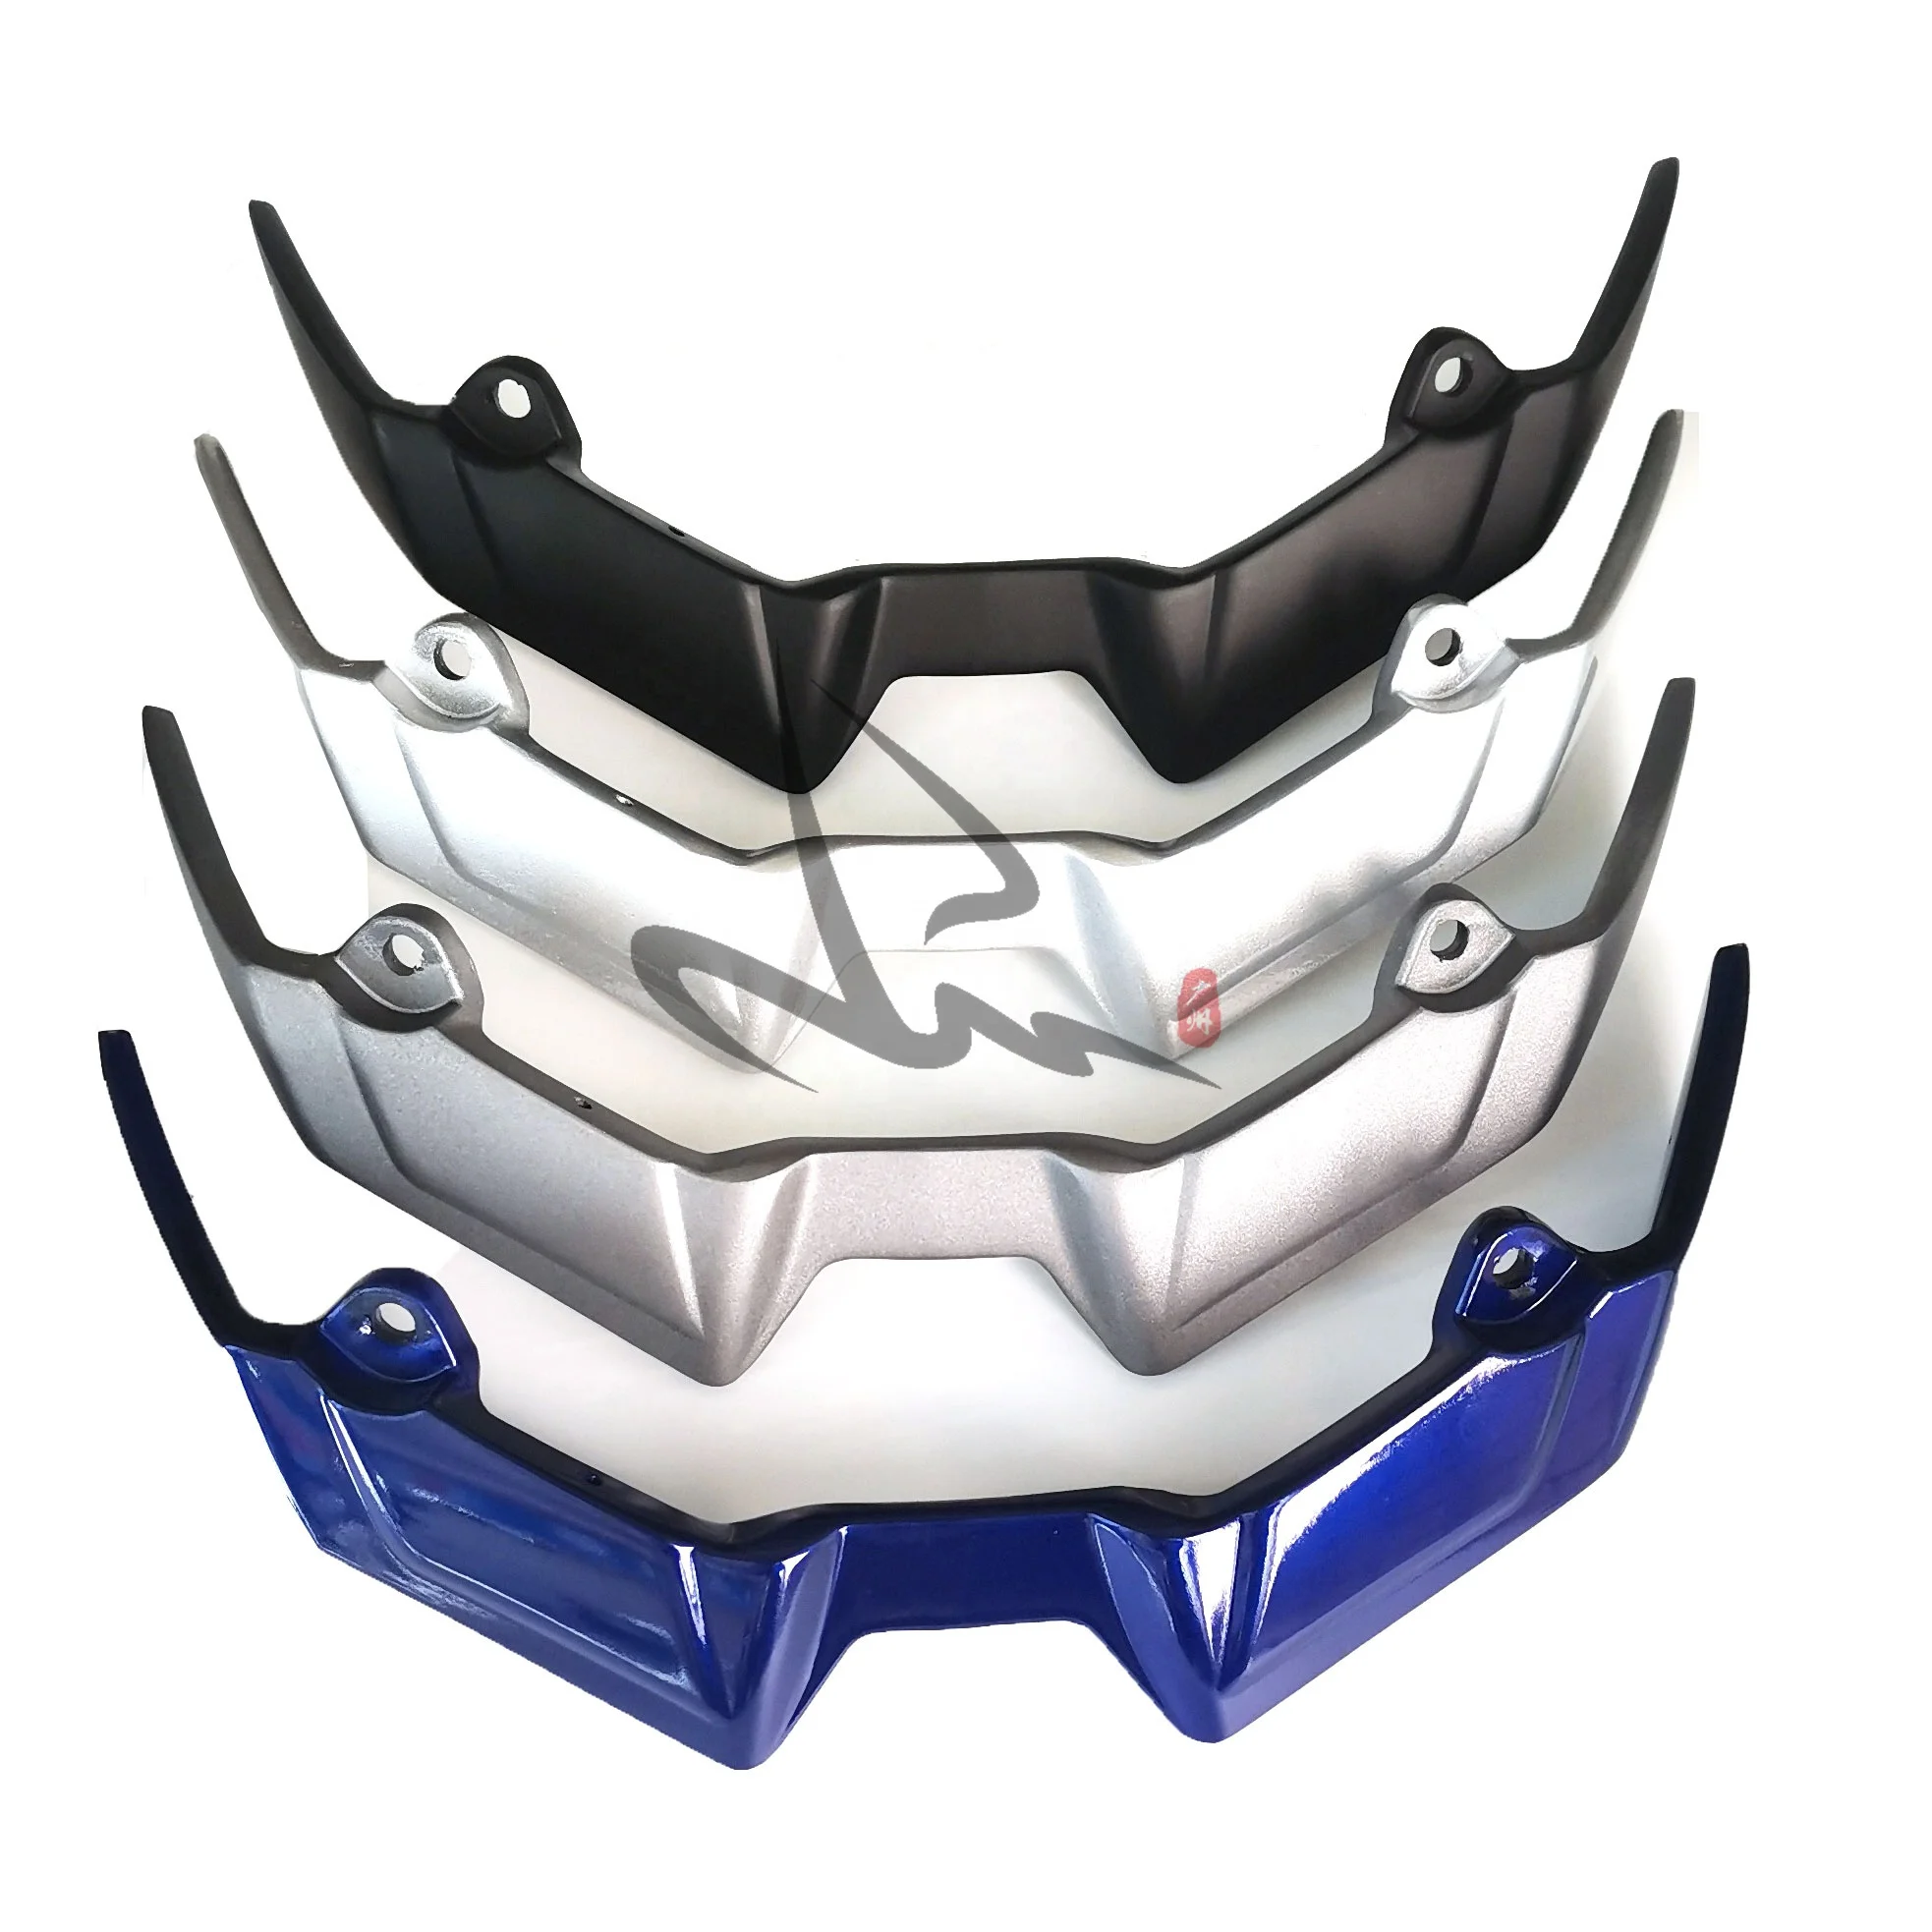 Source Matte Front Winglet For Yamaha 15 Mt-15 Accessories Motorcycle on m.alibaba.com